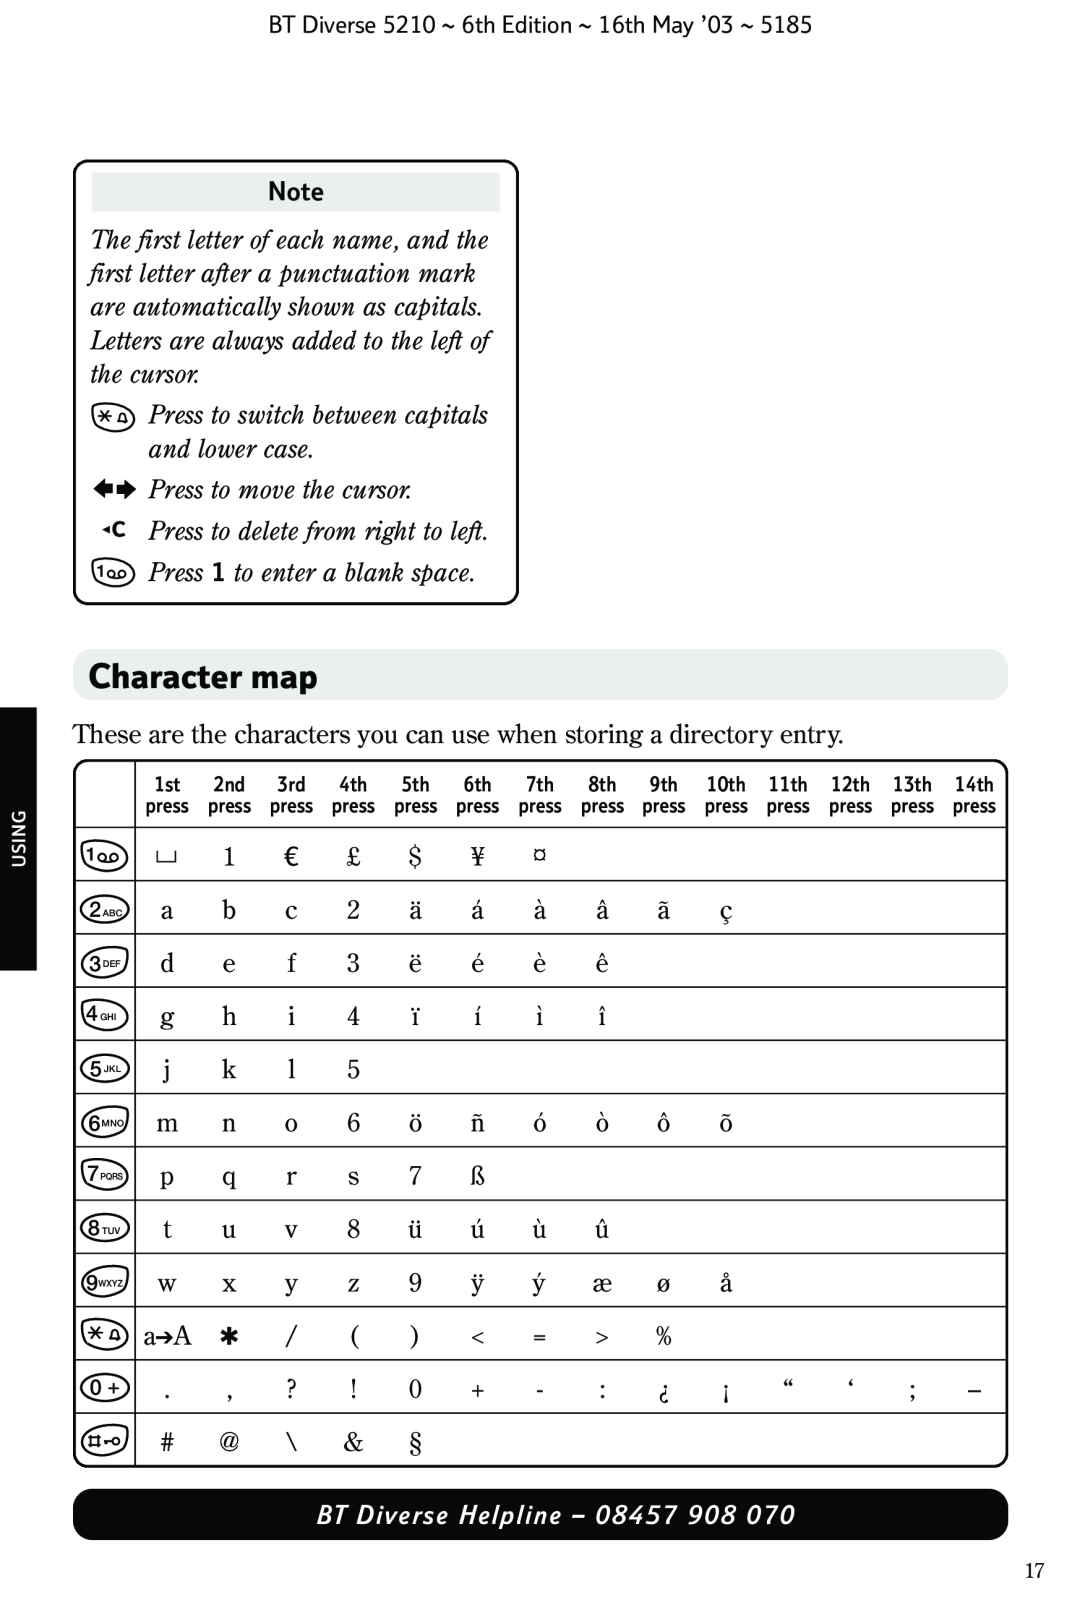 BT 5210 manual Character map, Press to switch between capitals and lower case, Press to move the cursor 